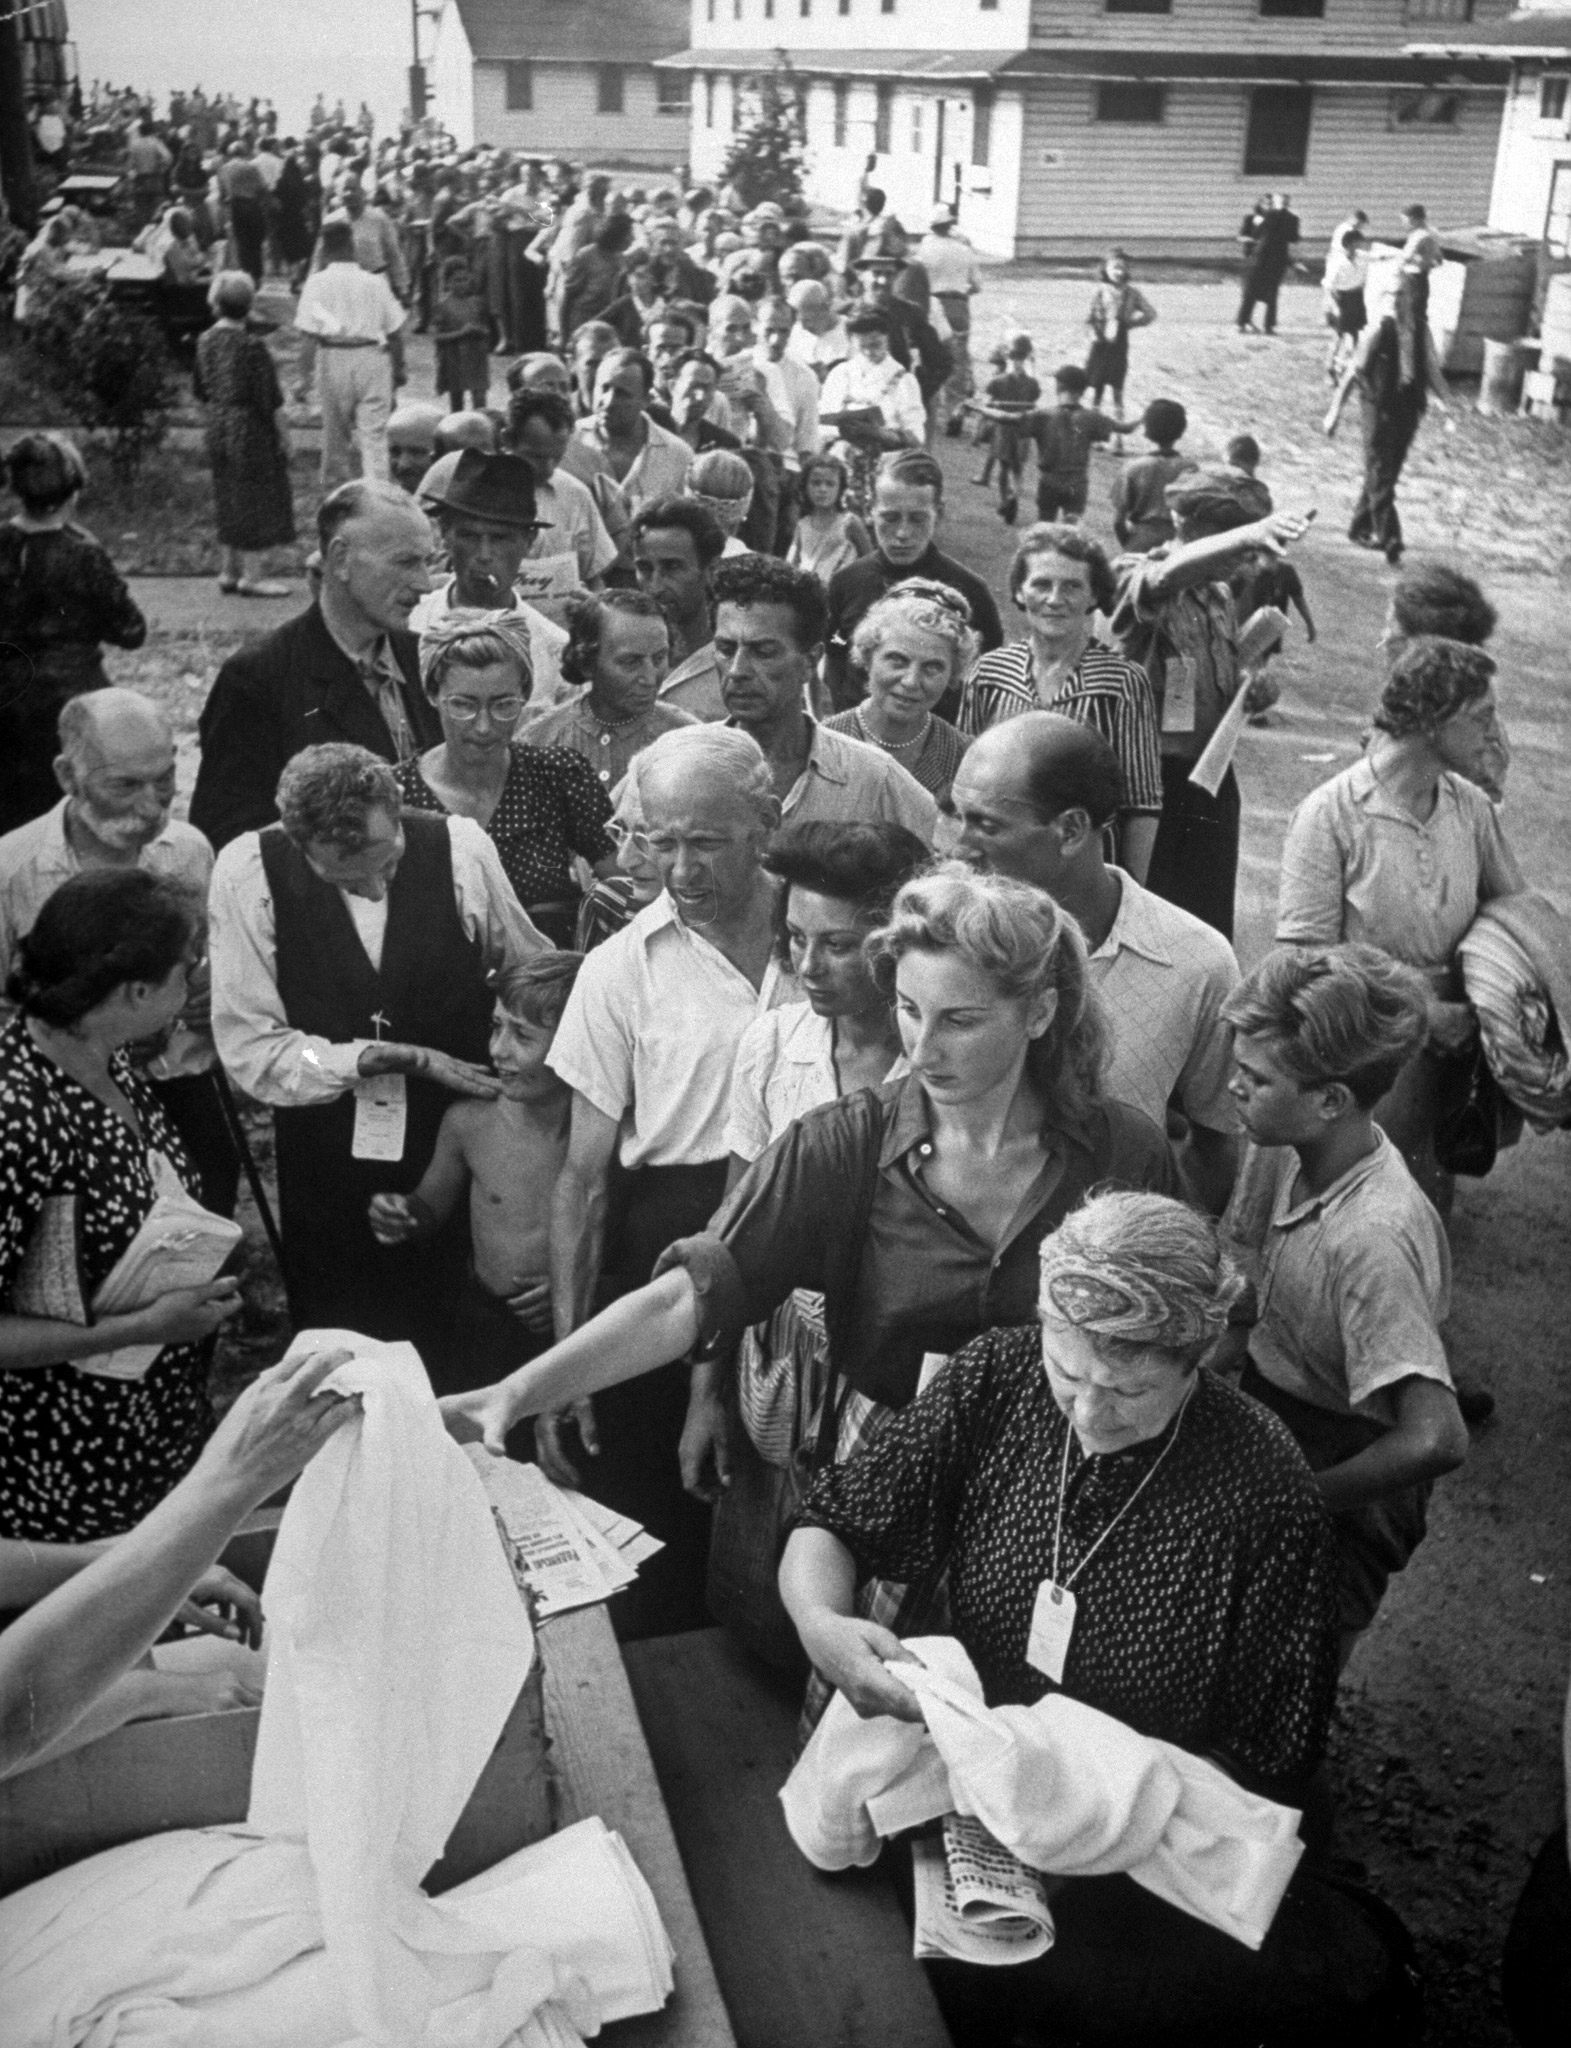 World War II refugees who arrived in New York in 1944.